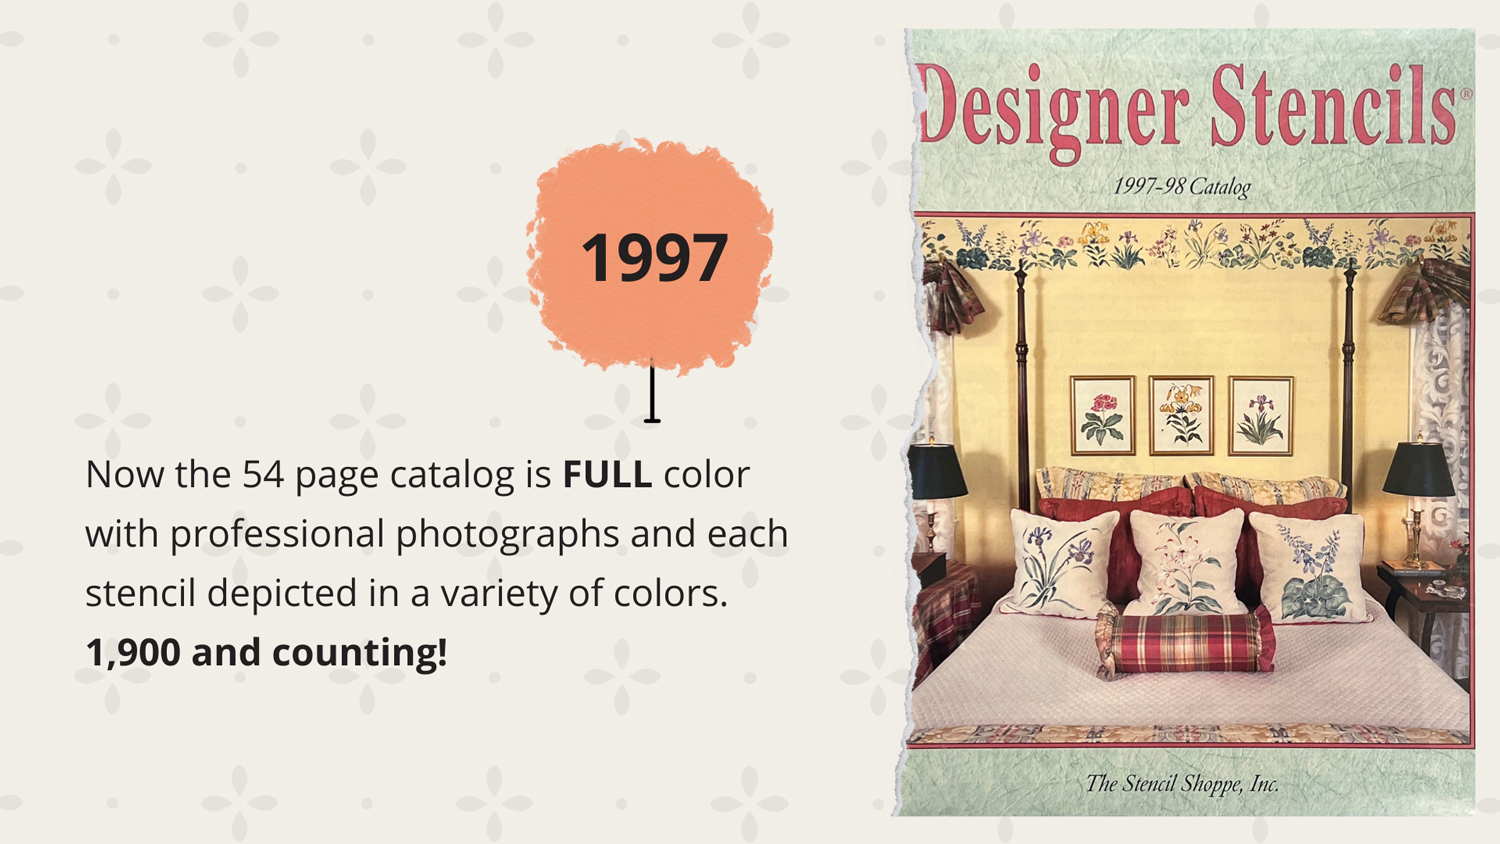 1997 - The now 54 page catalog is FULL color with professional photographs and each stencil depicted in a variety of colors. 1,900 and counting!